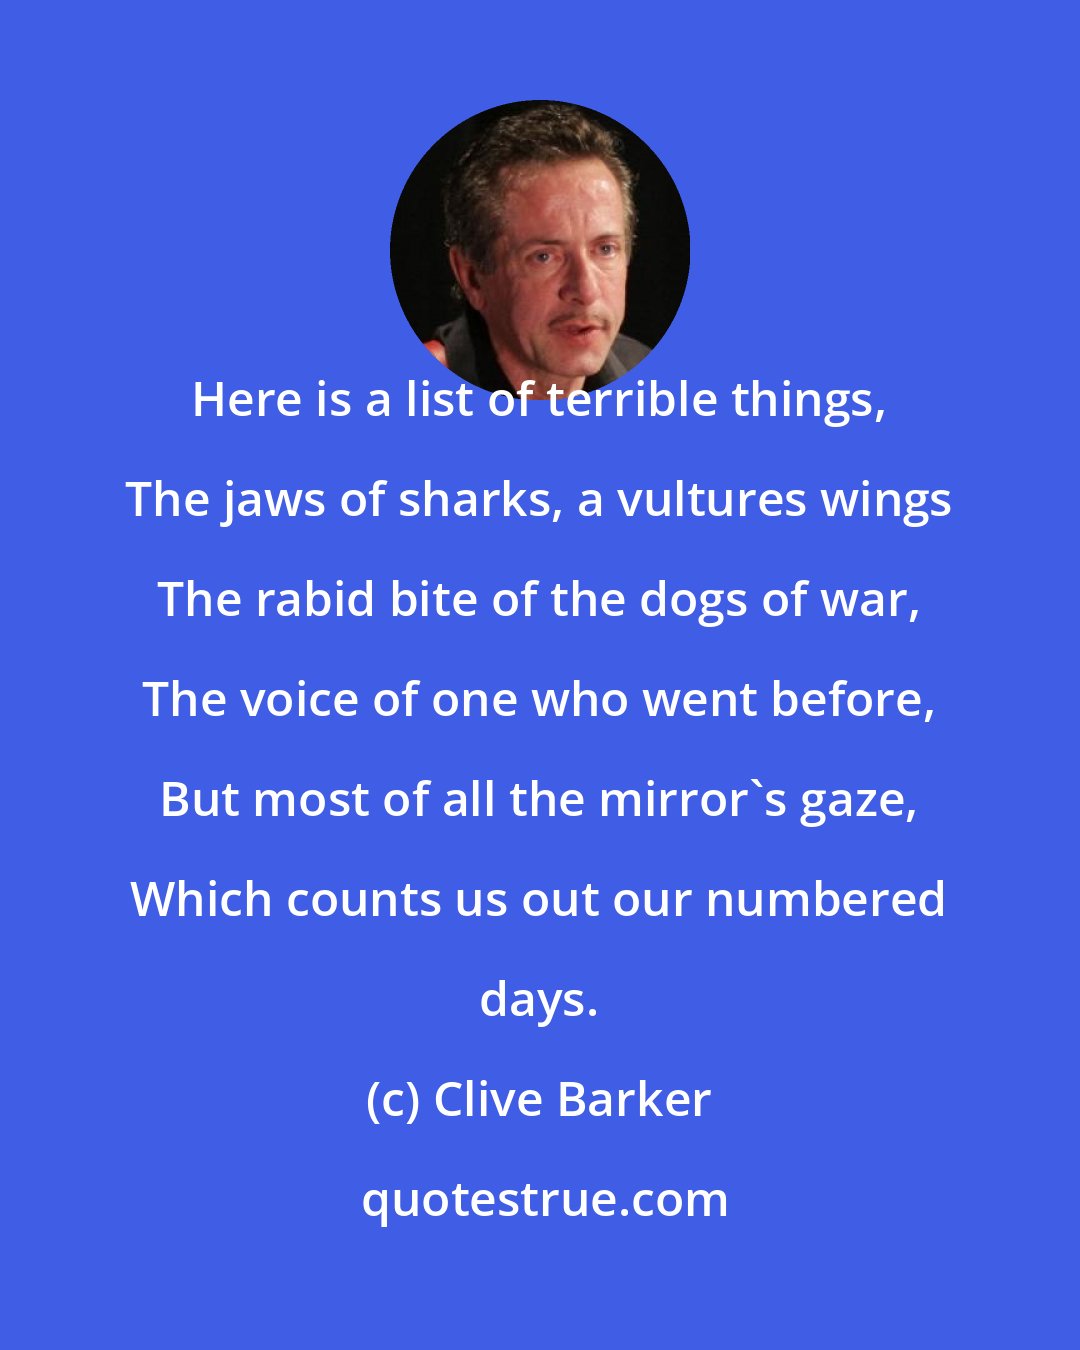 Clive Barker: Here is a list of terrible things, The jaws of sharks, a vultures wings The rabid bite of the dogs of war, The voice of one who went before, But most of all the mirror's gaze, Which counts us out our numbered days.